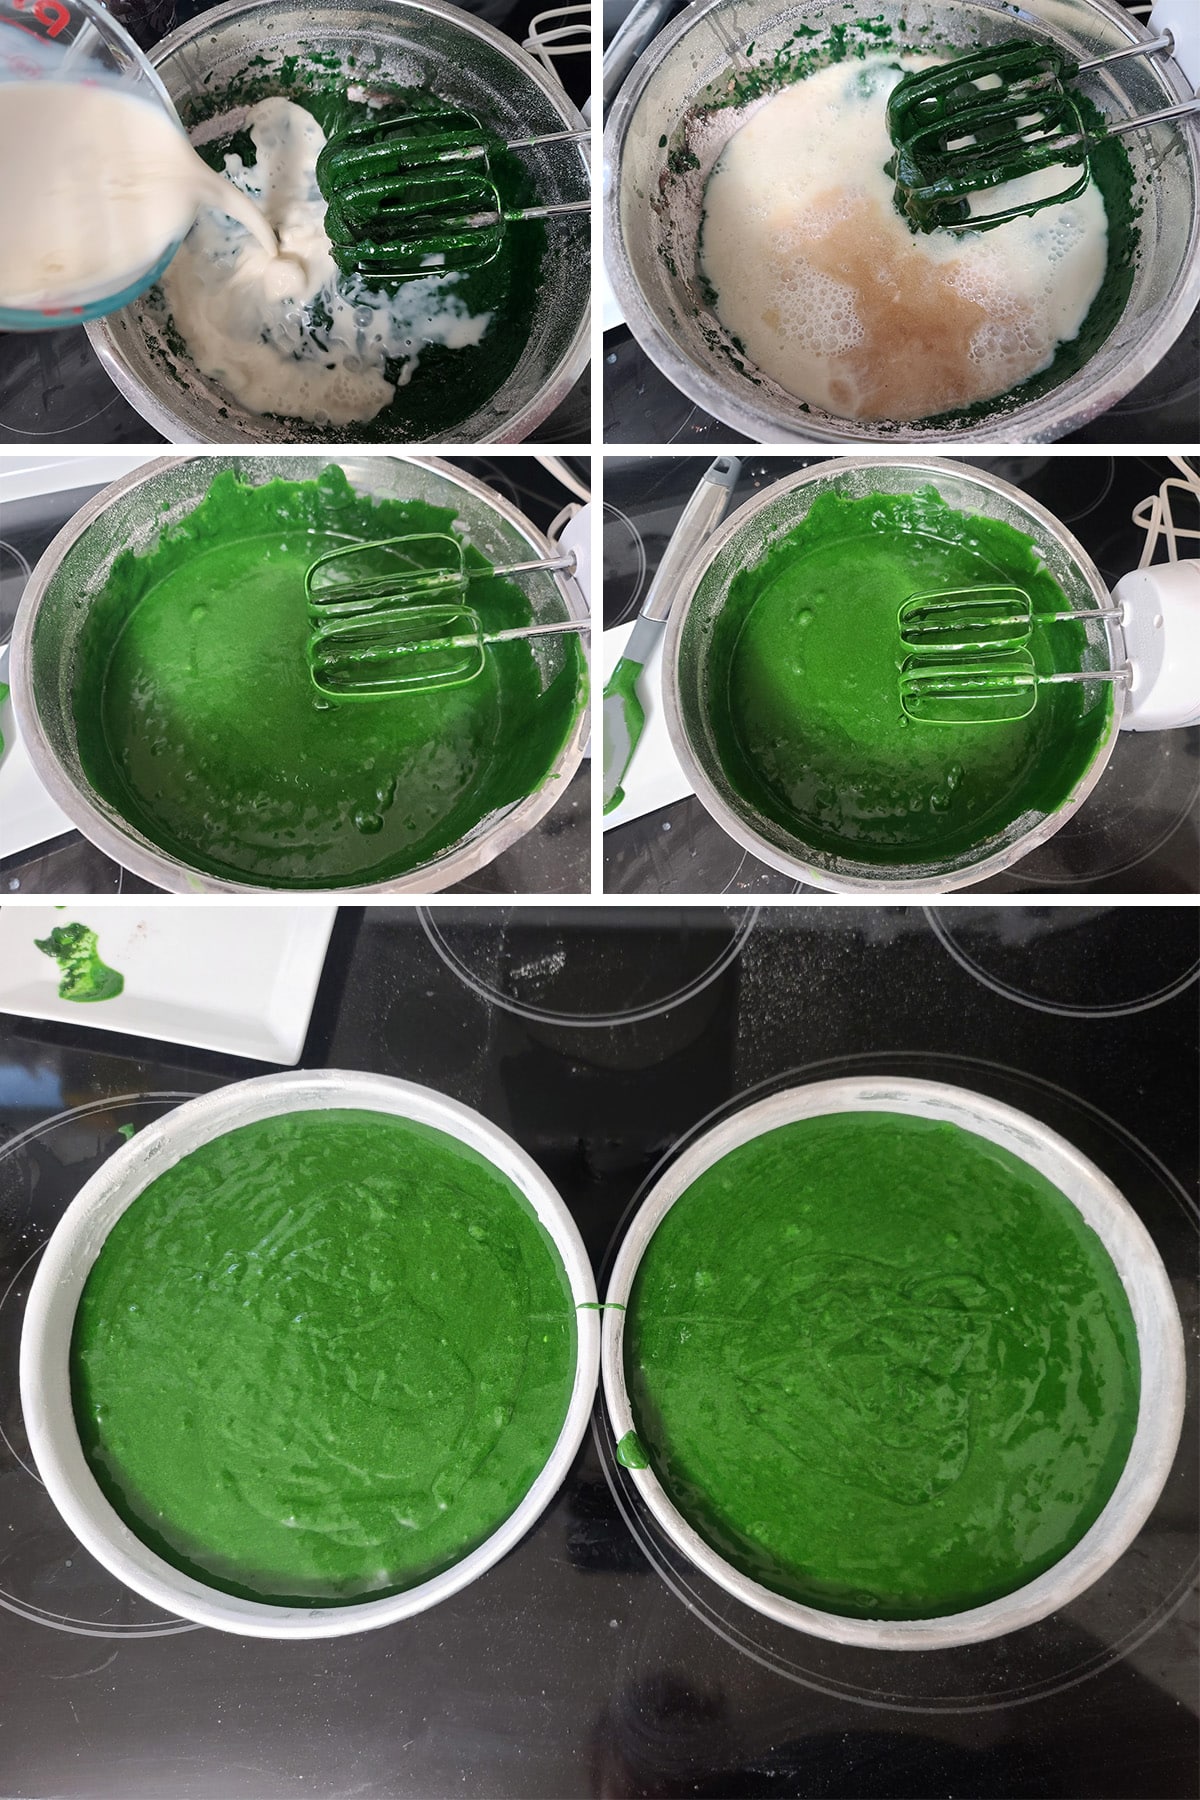 A 5 part image showing the milk being added and whipped to a bright green batter, then poured into 2 round cake pans.